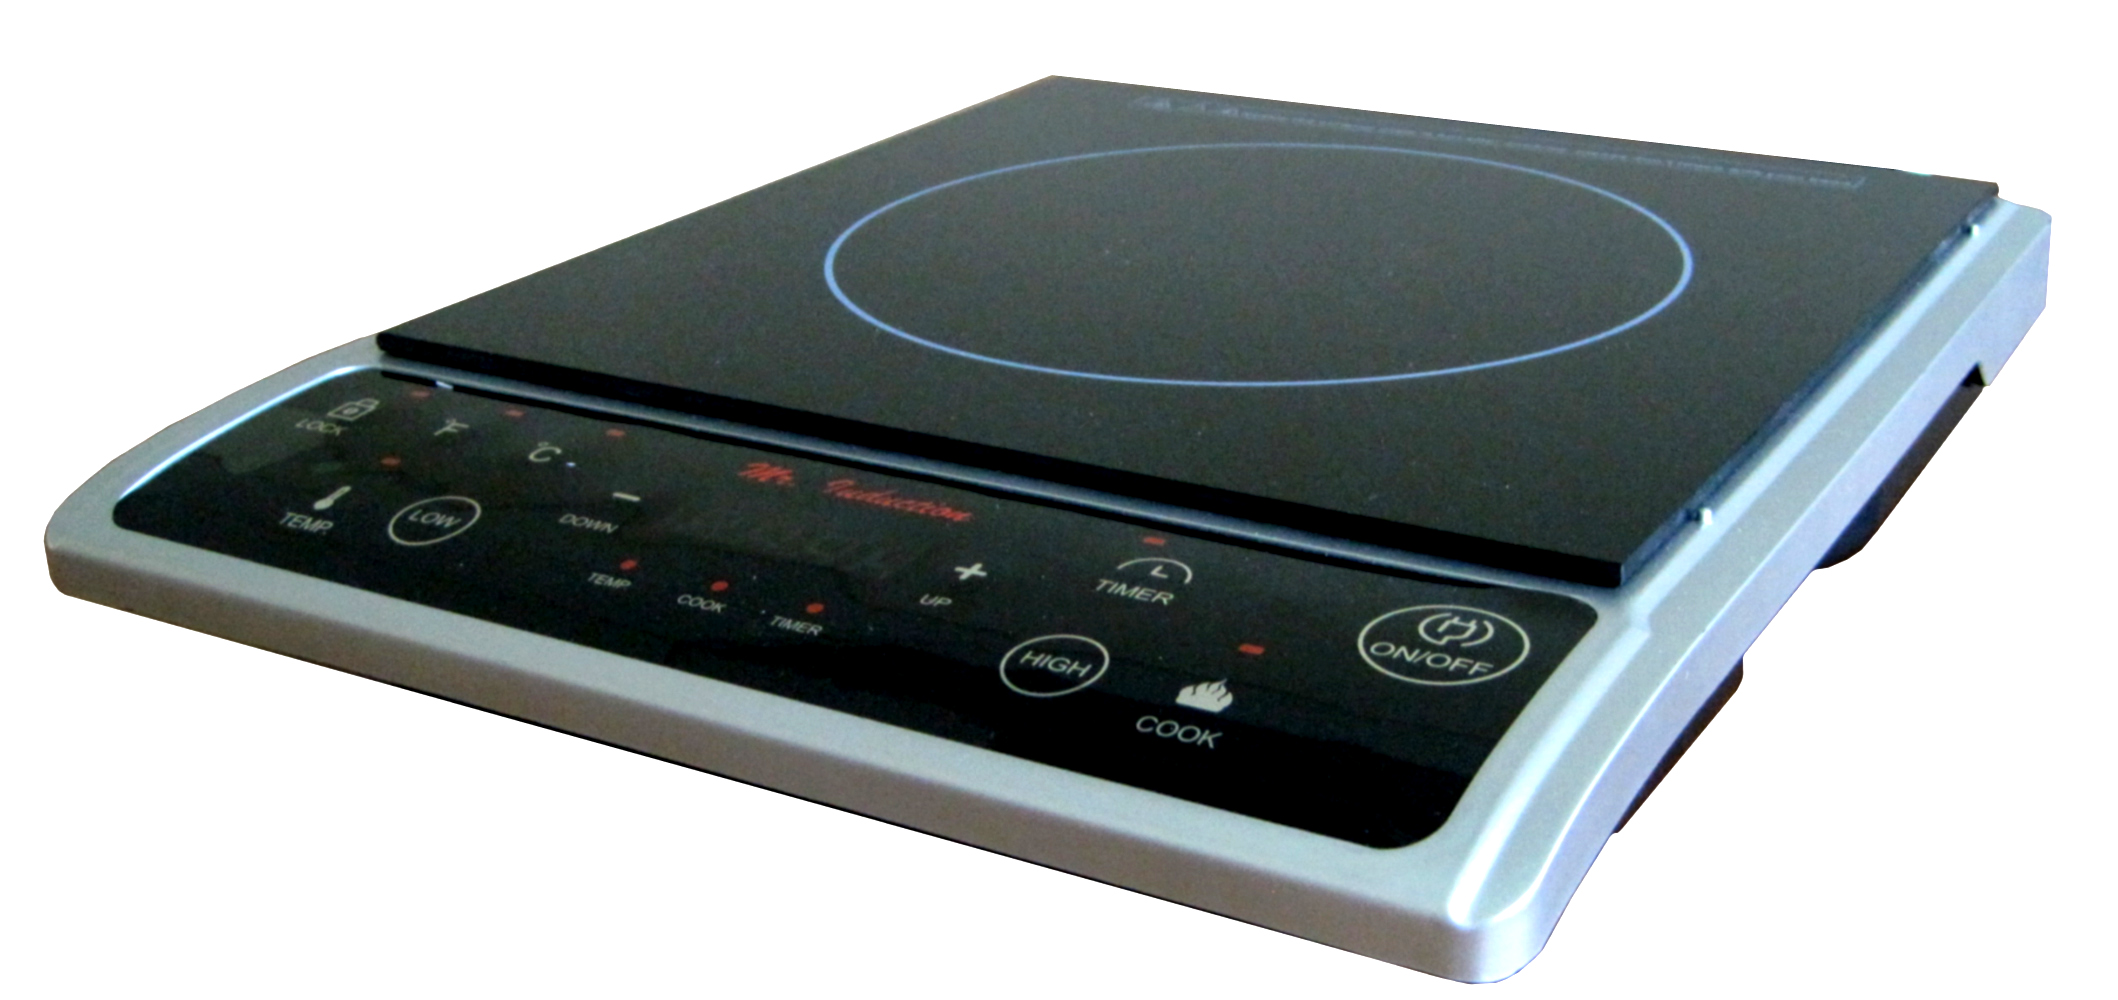 SPT 1,300W Induction Cooktop, Silver - image 2 of 4